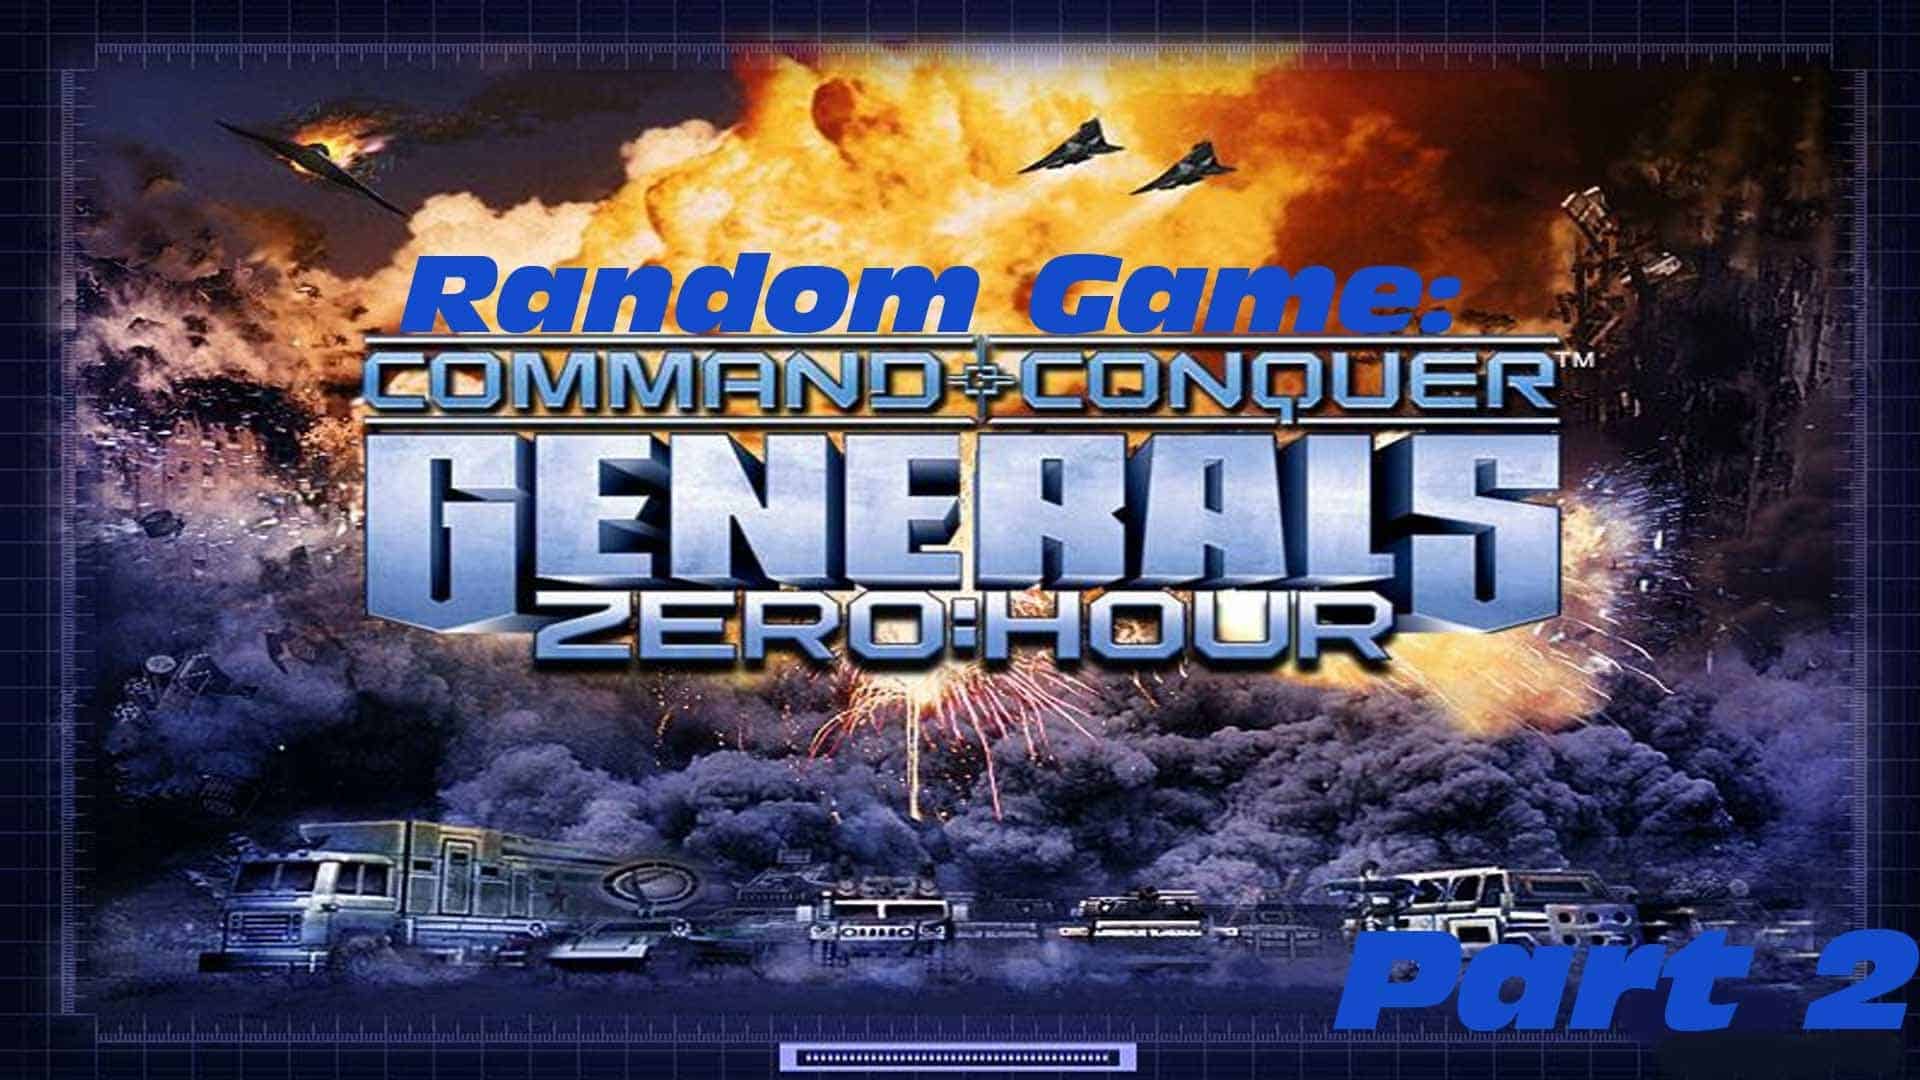 play command and conquer generals zero hour no cd patch